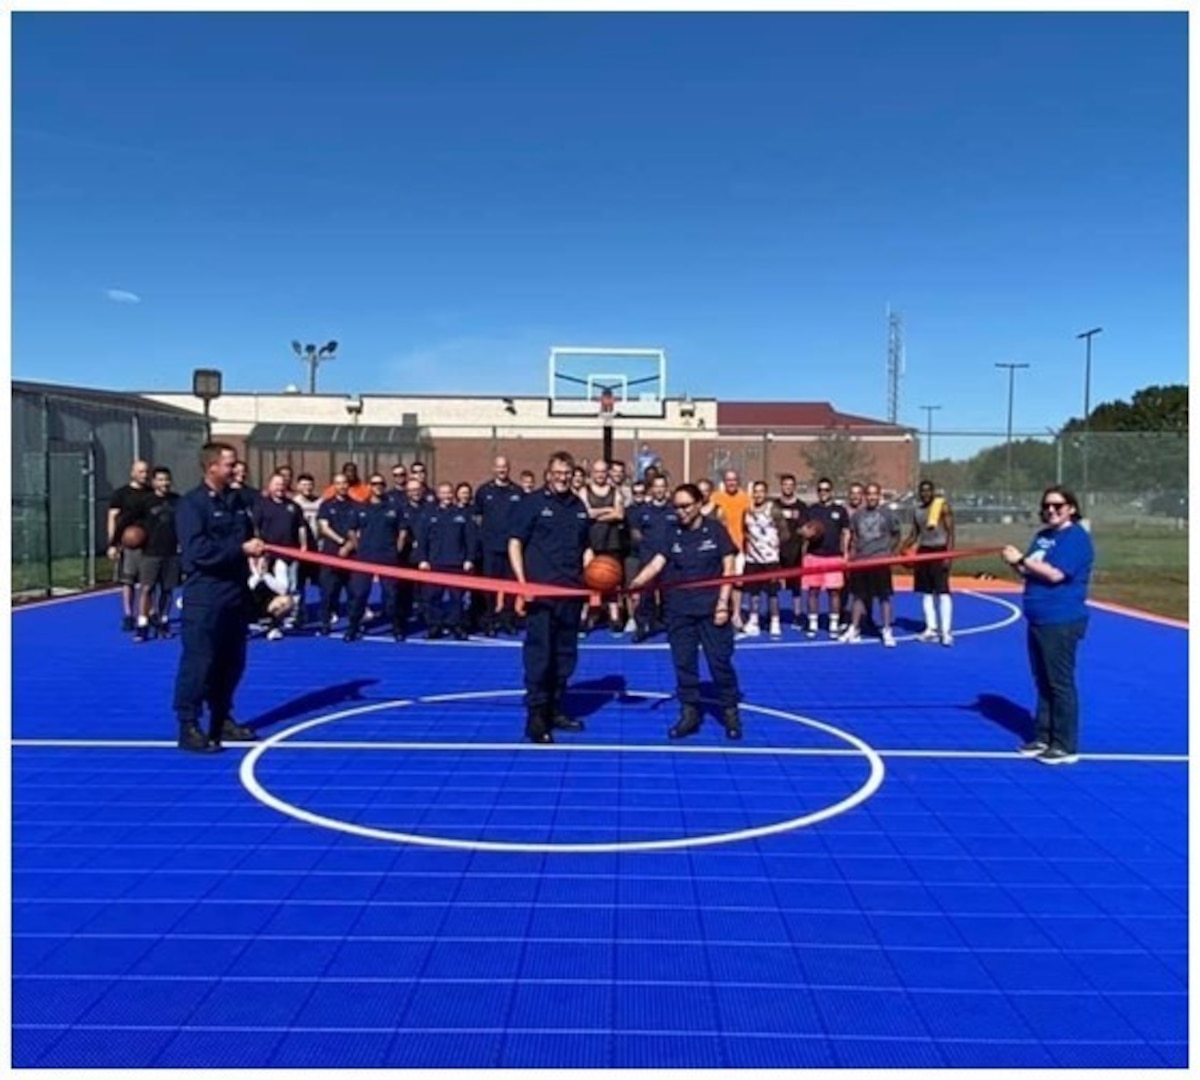 Coast Guard members attend a ribbon-cutting ceremony for a renovated basketball court at Sector Long Island Sound, Connecticut, Oct. 20, 2021 (U.S. Coast Guard photo by Lt. j.g. Sarah Dupre).